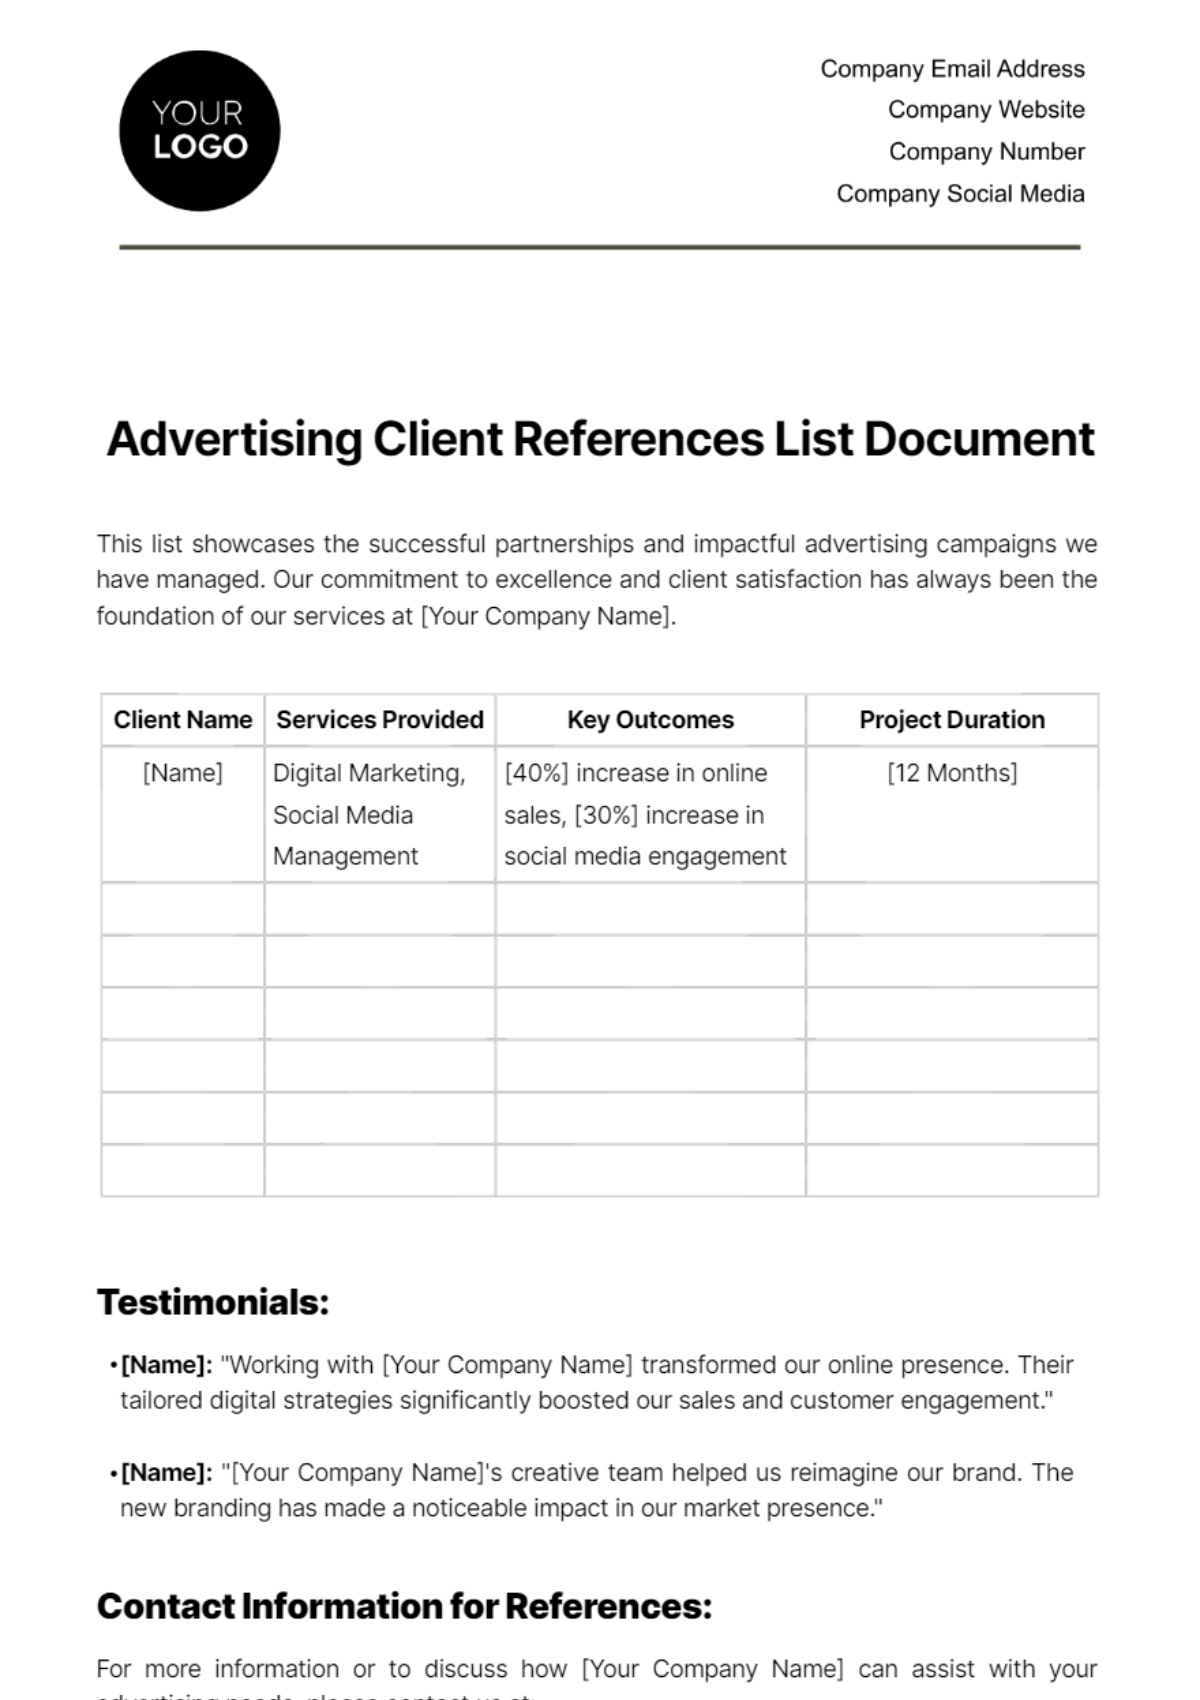 Free Advertising Client References List Document Template